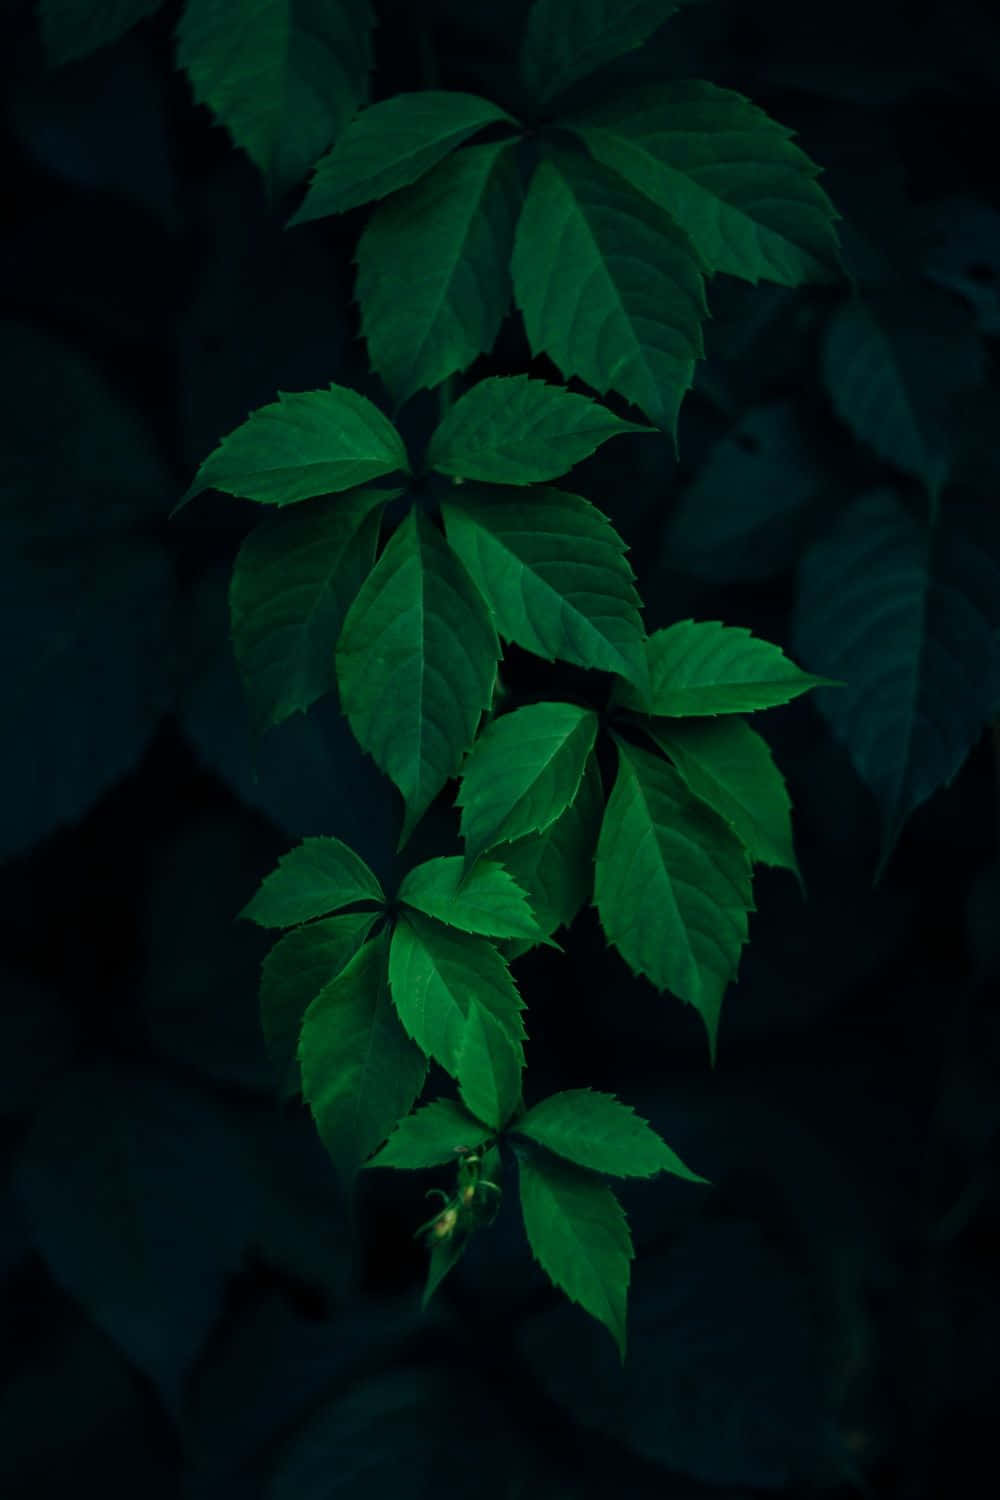 Green Leaves On A Dark Background